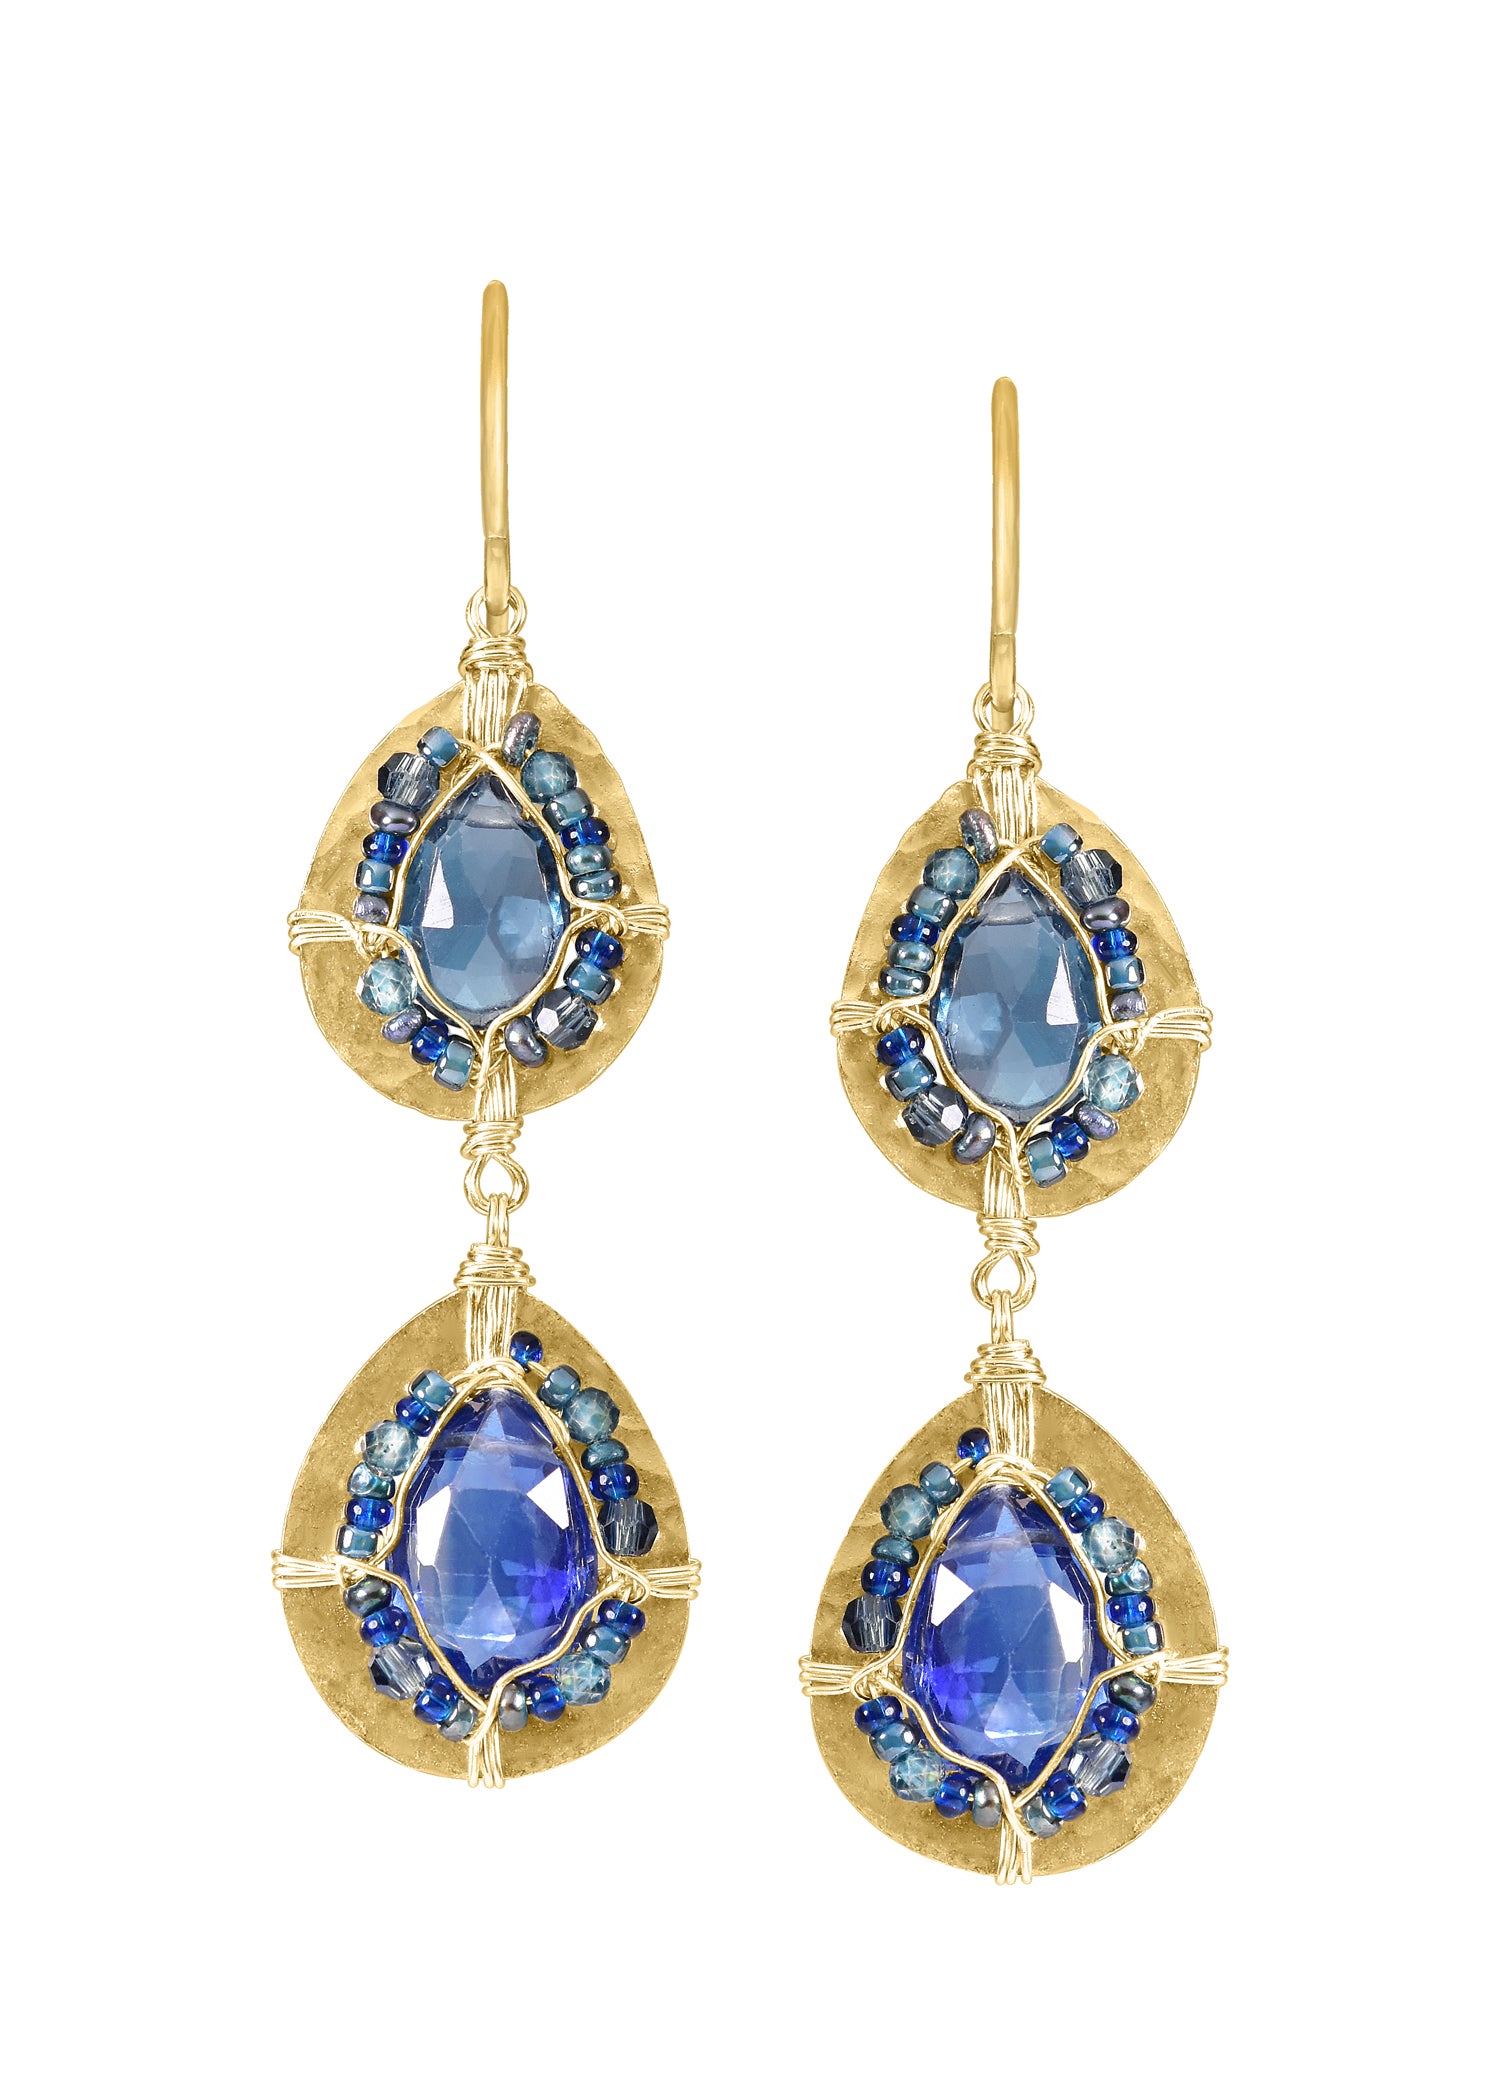 Kyanite Blue quartz Crystal Seed beads 14k gold fill Earrings measure 1-7/8"" in length (including the ear wires) and 1/2" in width at the widest point Handmade in our Los Angeles studio